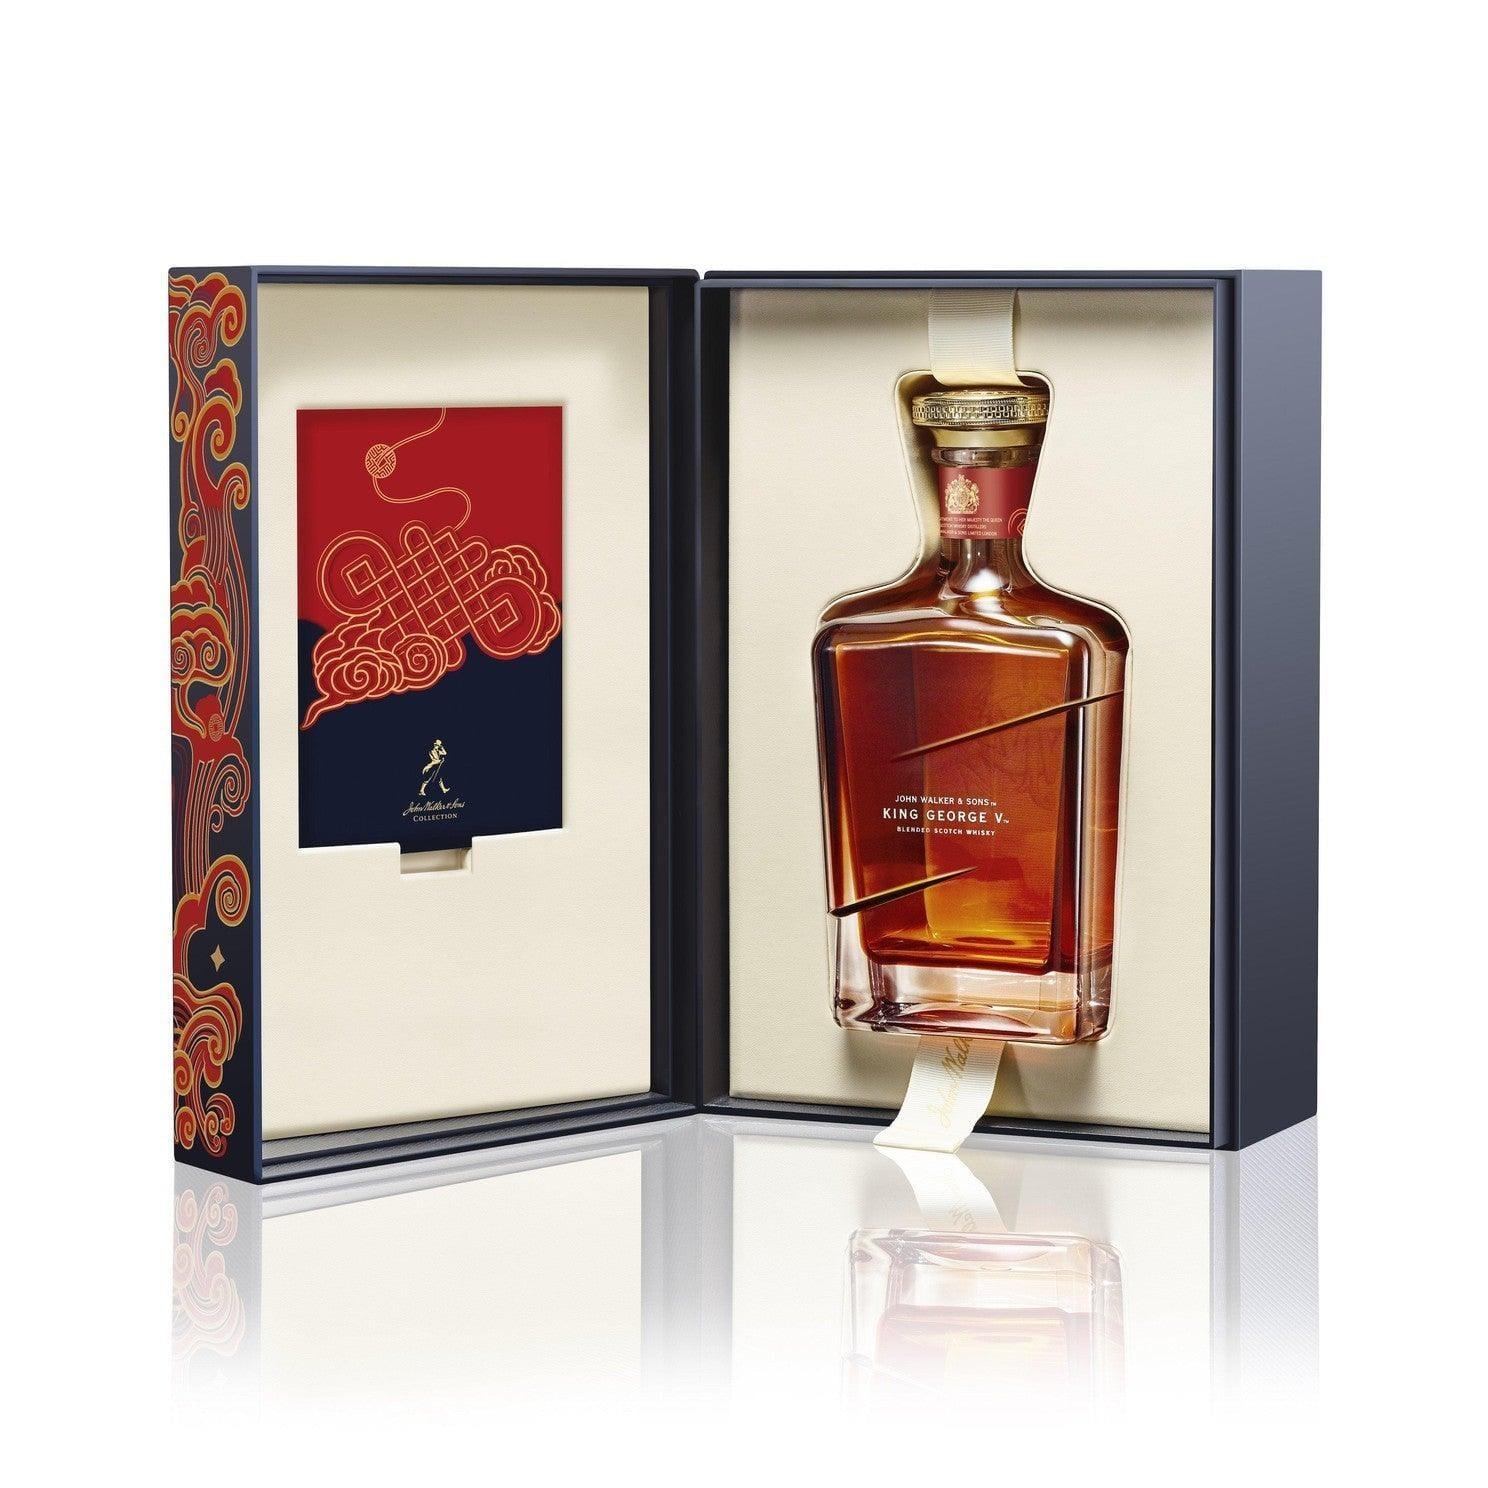 John Walker & Sons King George V - Chinese New Year Edition 2021 - Booze House